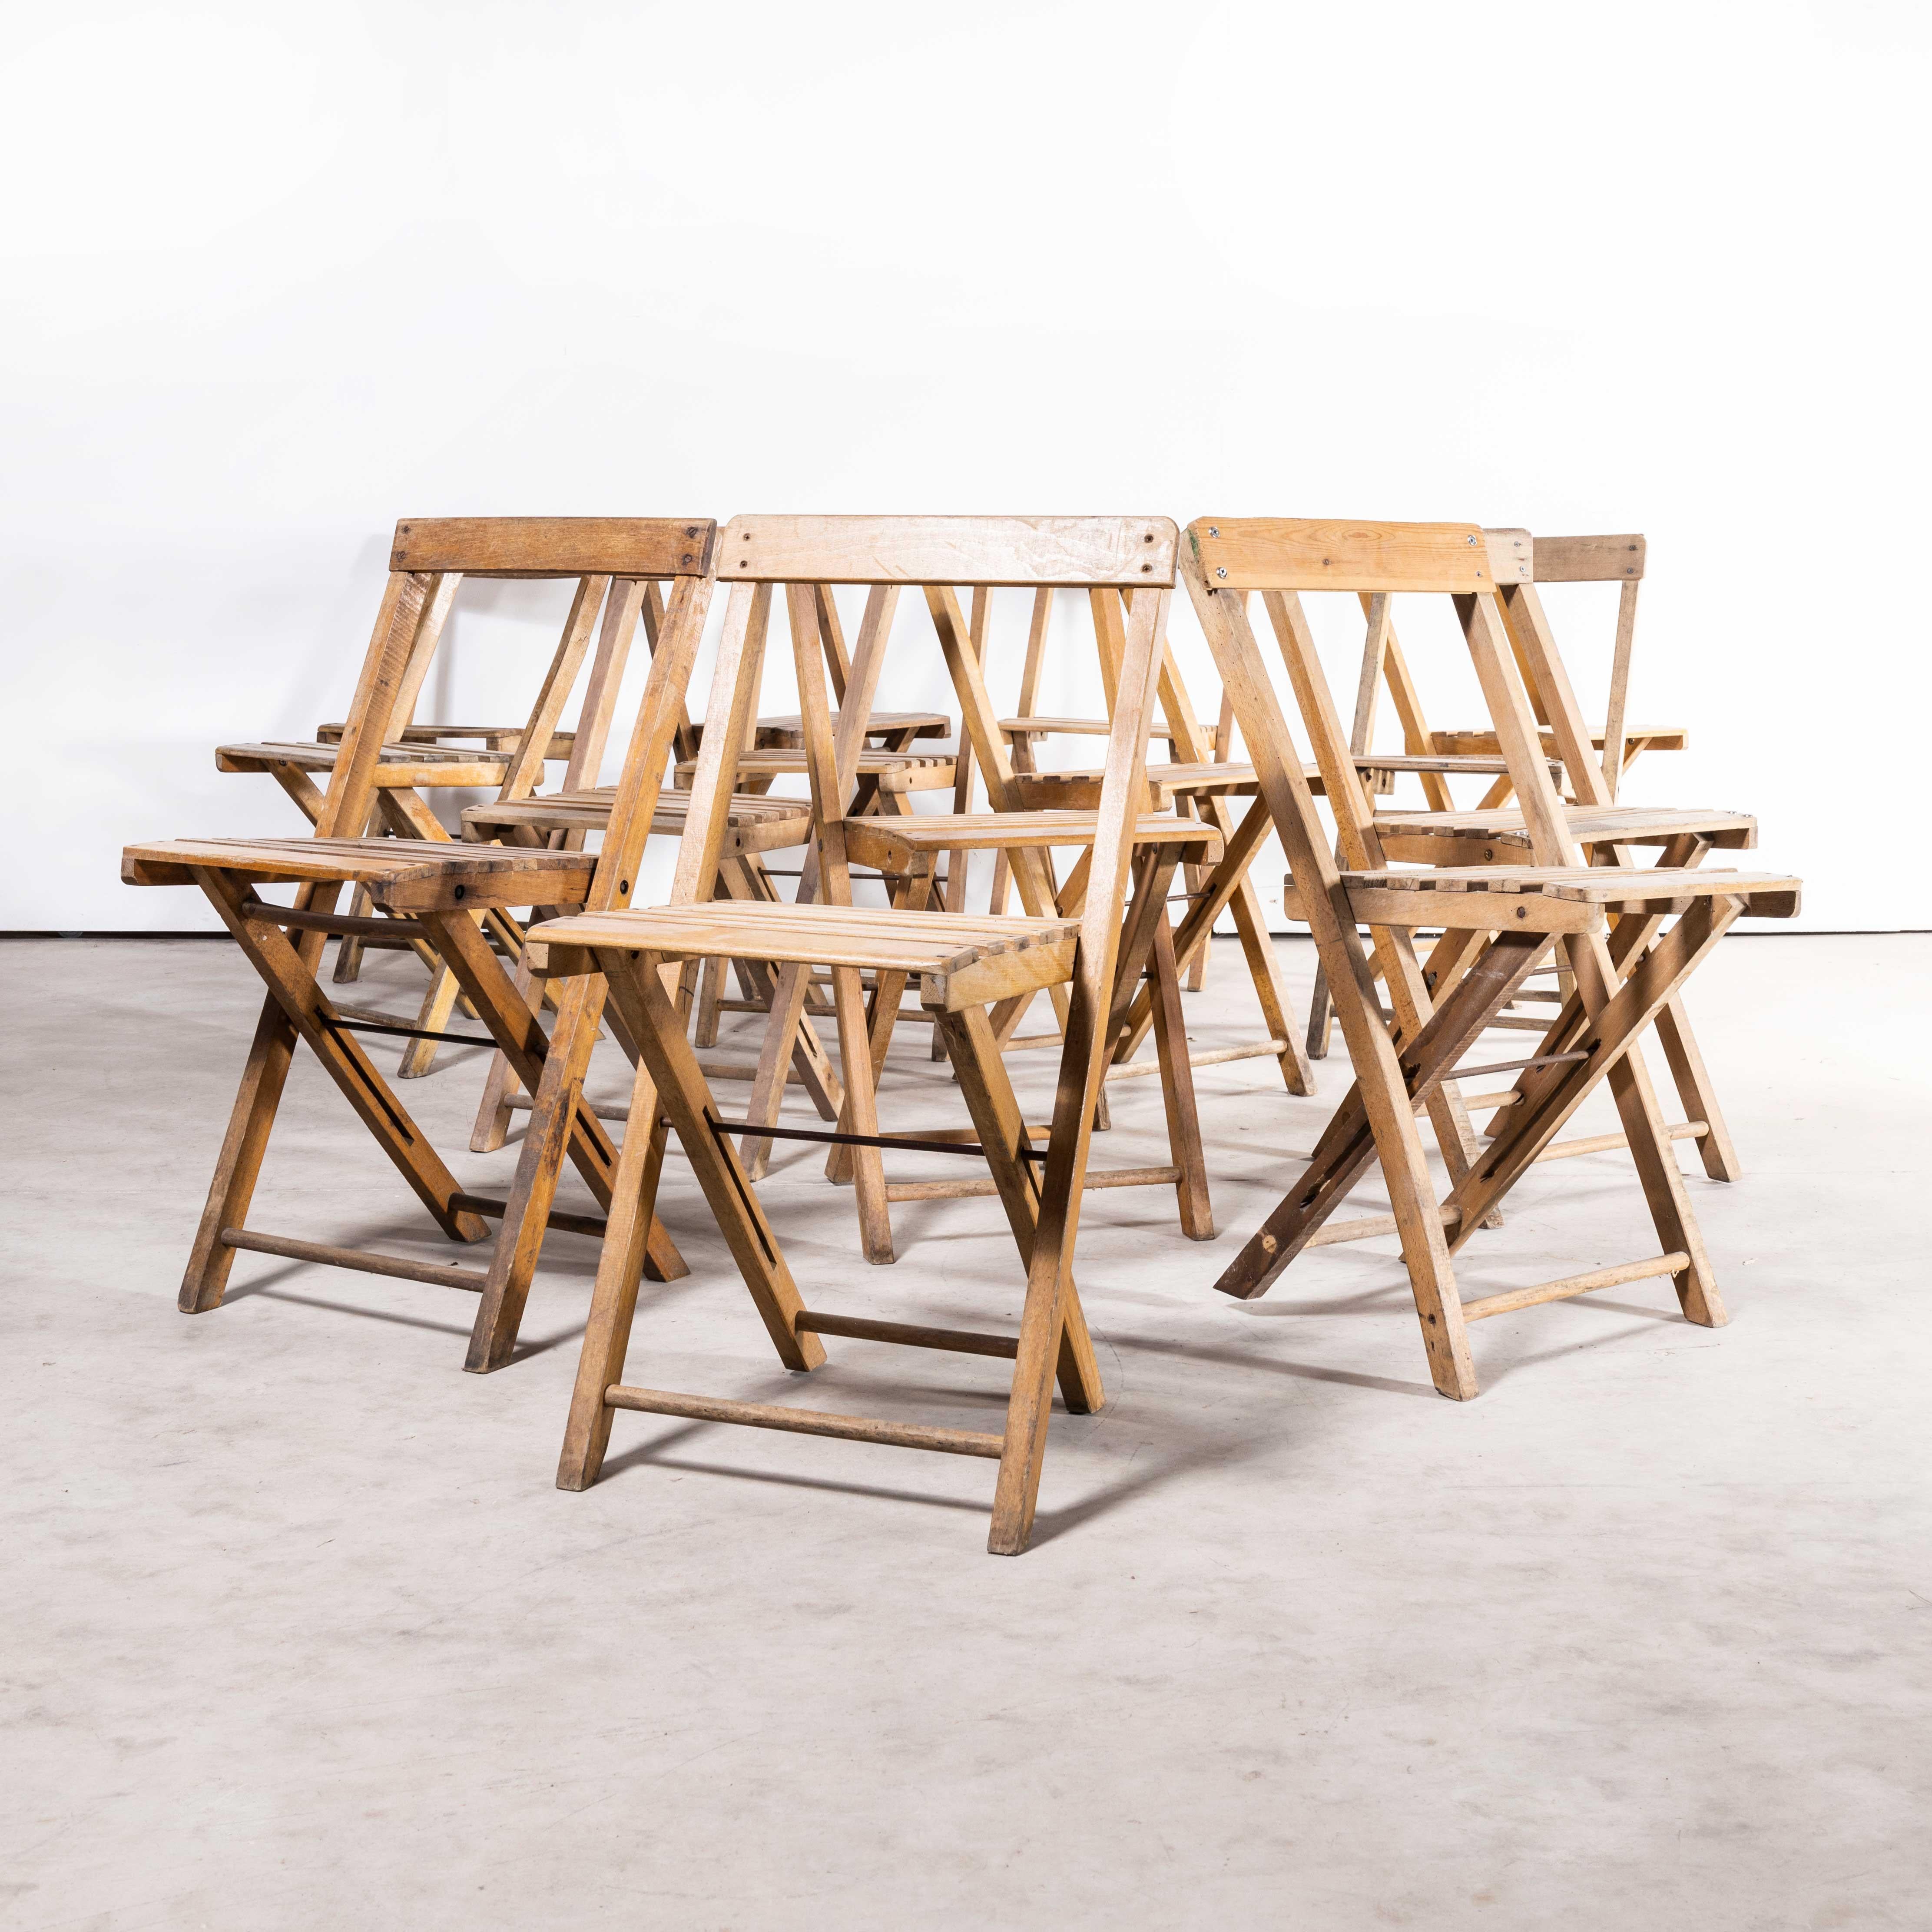 1960s beech folding chairs – set of fourteen
1960s beech folding chairs – set of fourteen. Good practical Classic folding chairs originally made in Germany of solid beech. Every chair passes through our workshops where they are cleaned and